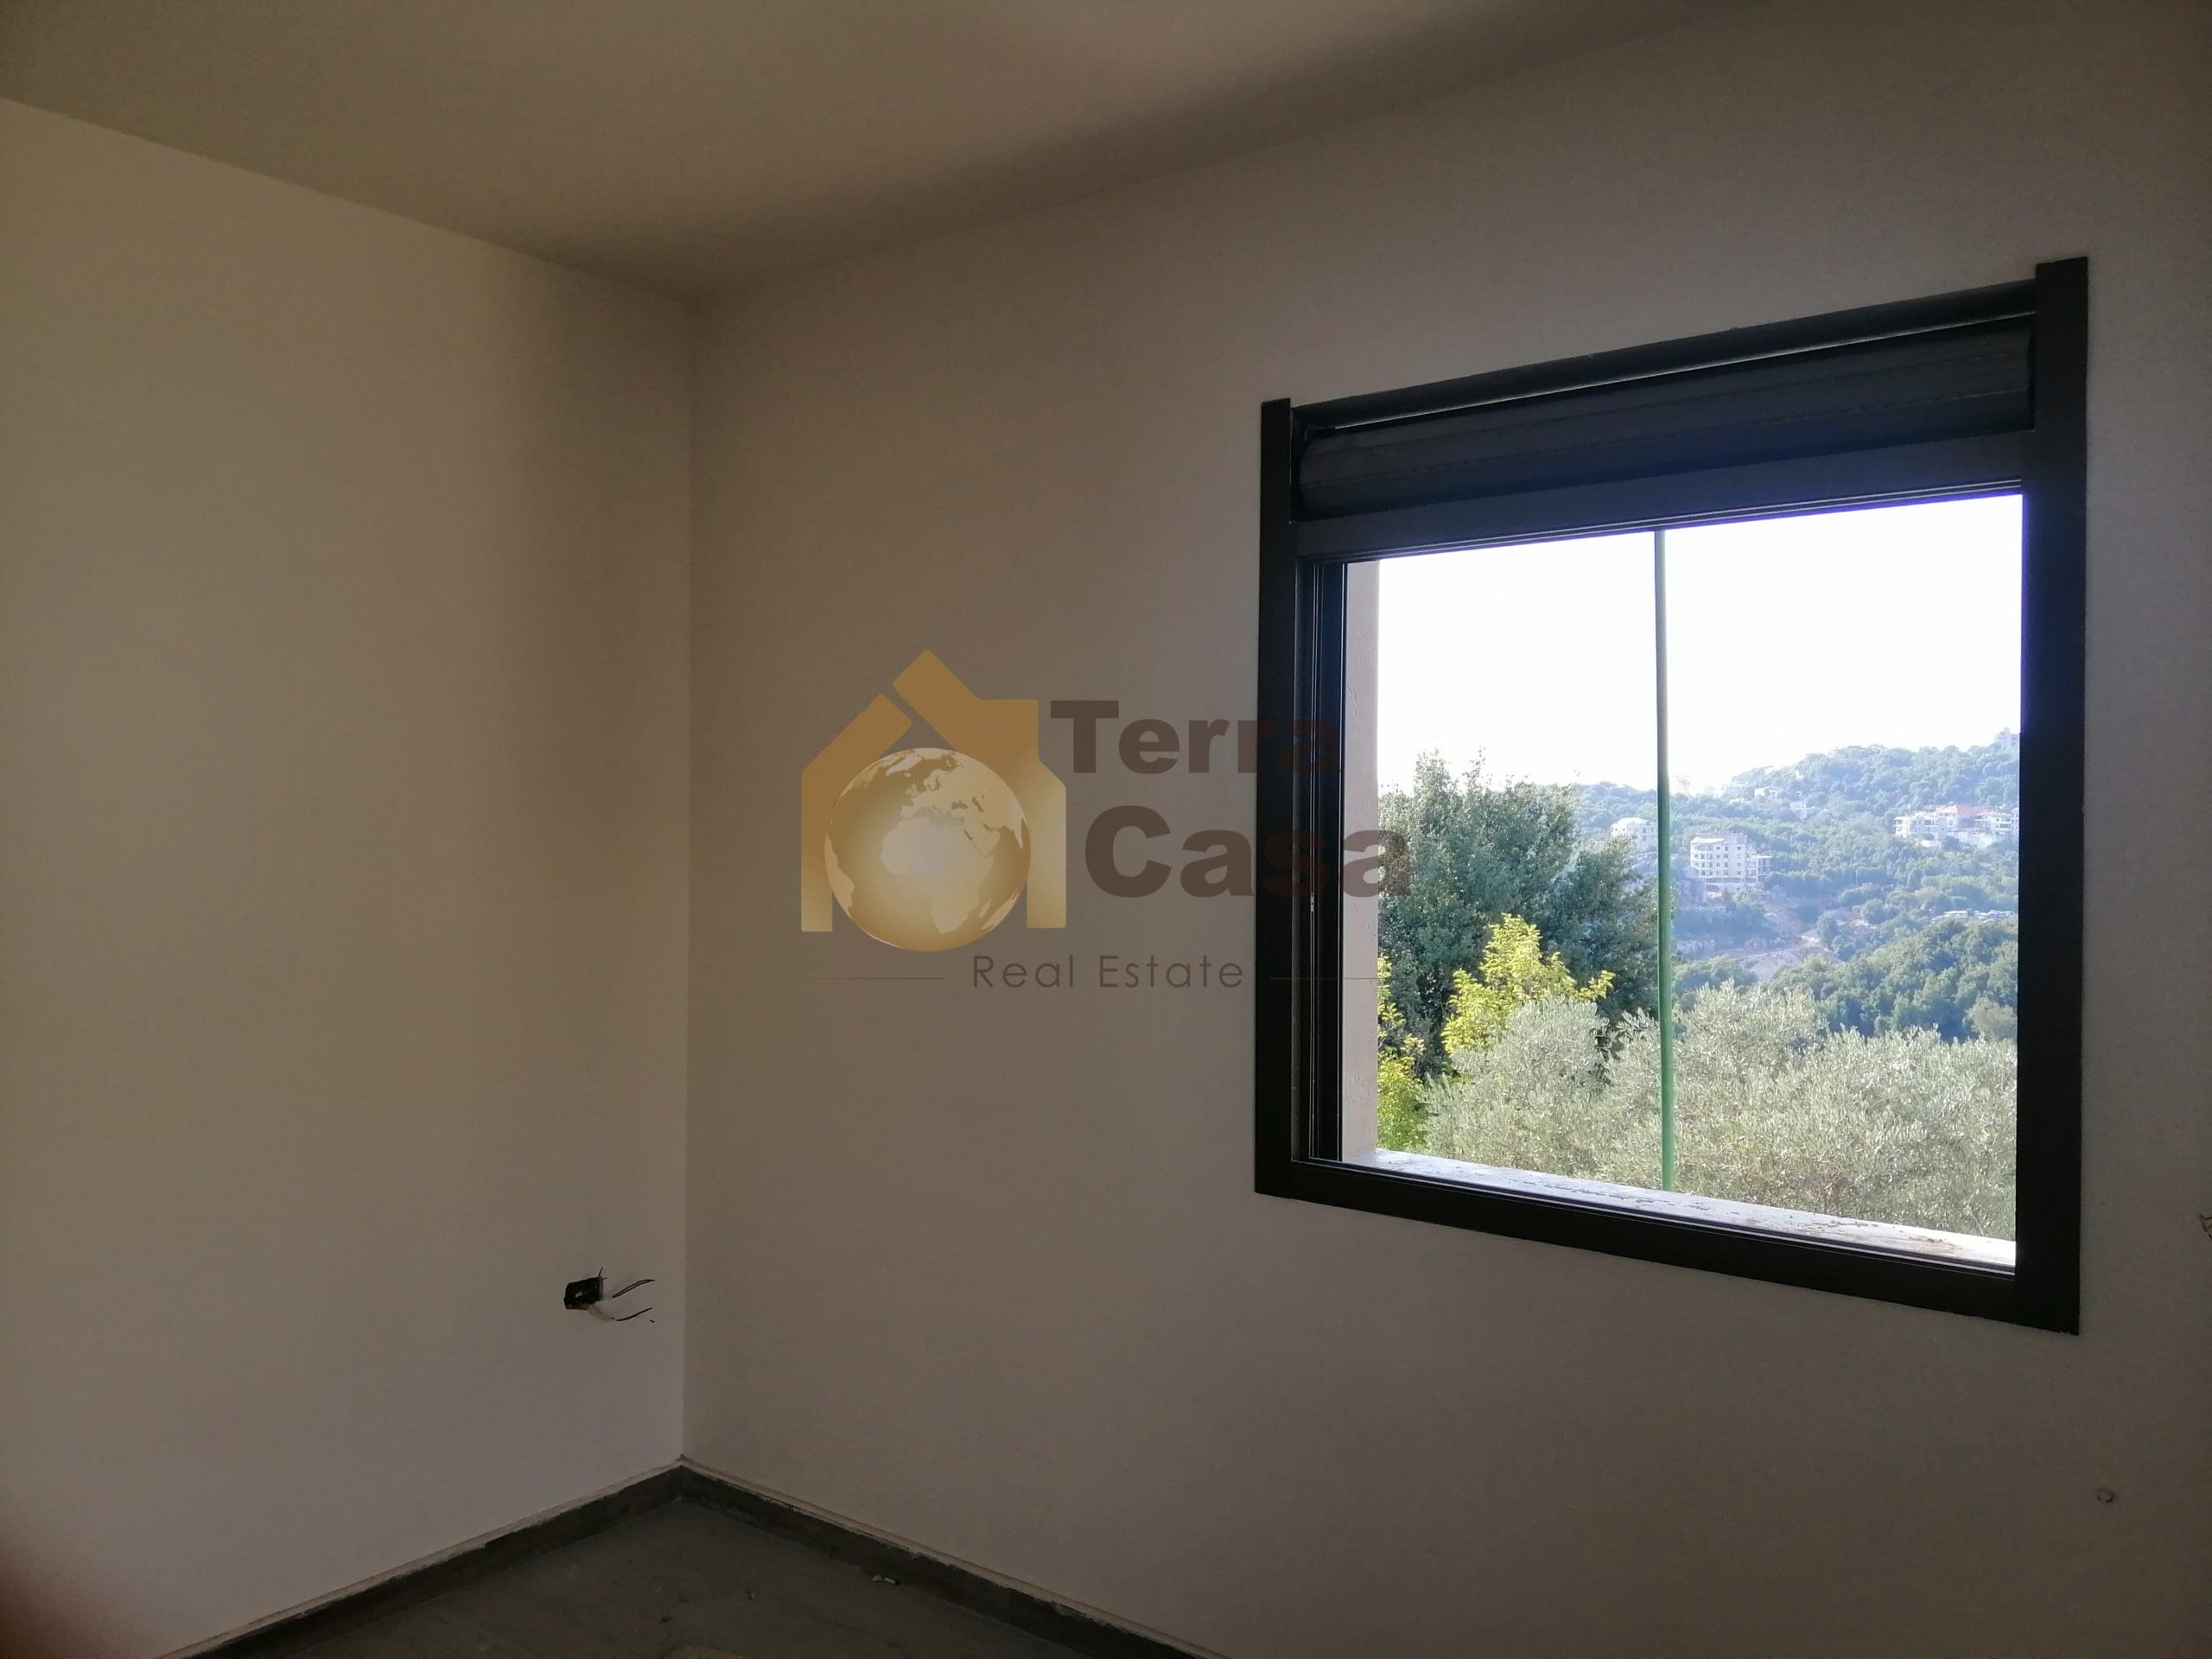 New apartment in Achkout consisting of 180sqm located in nice area